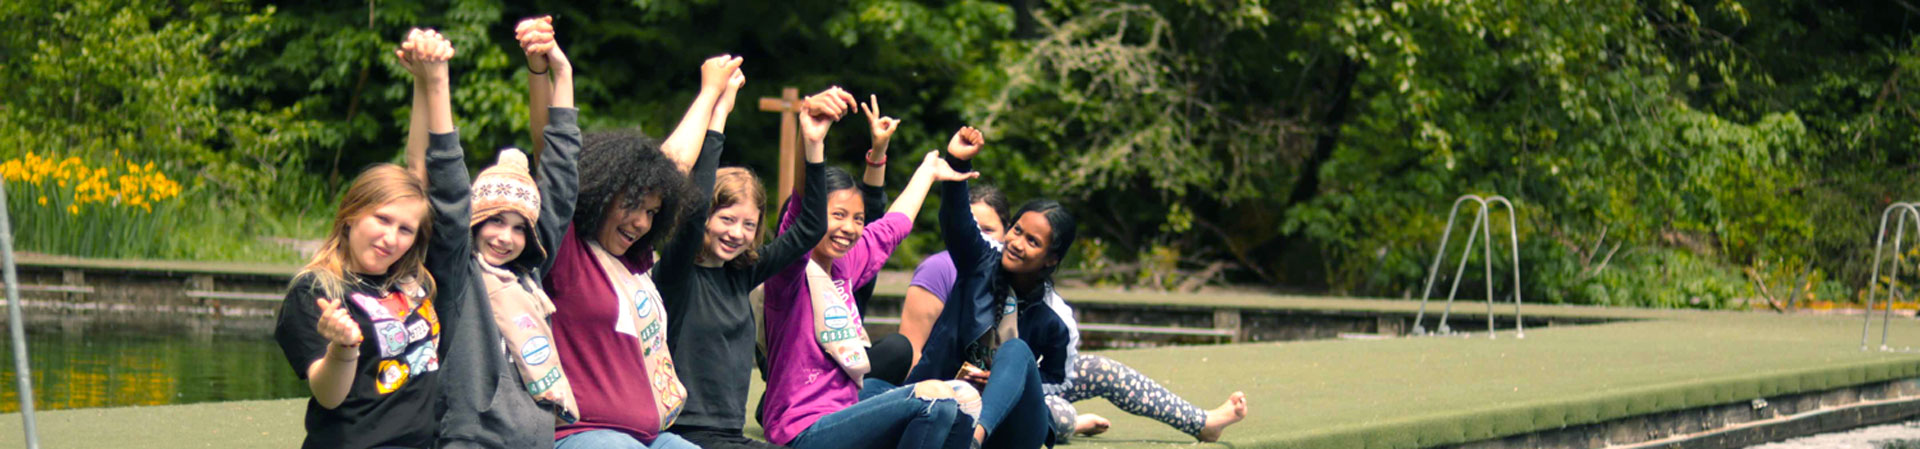  Image Description: A group of Girl Scouts sits on a dock on a lake. They are in a row with their arms raised high over their heads, and they are holding each other's hands.  